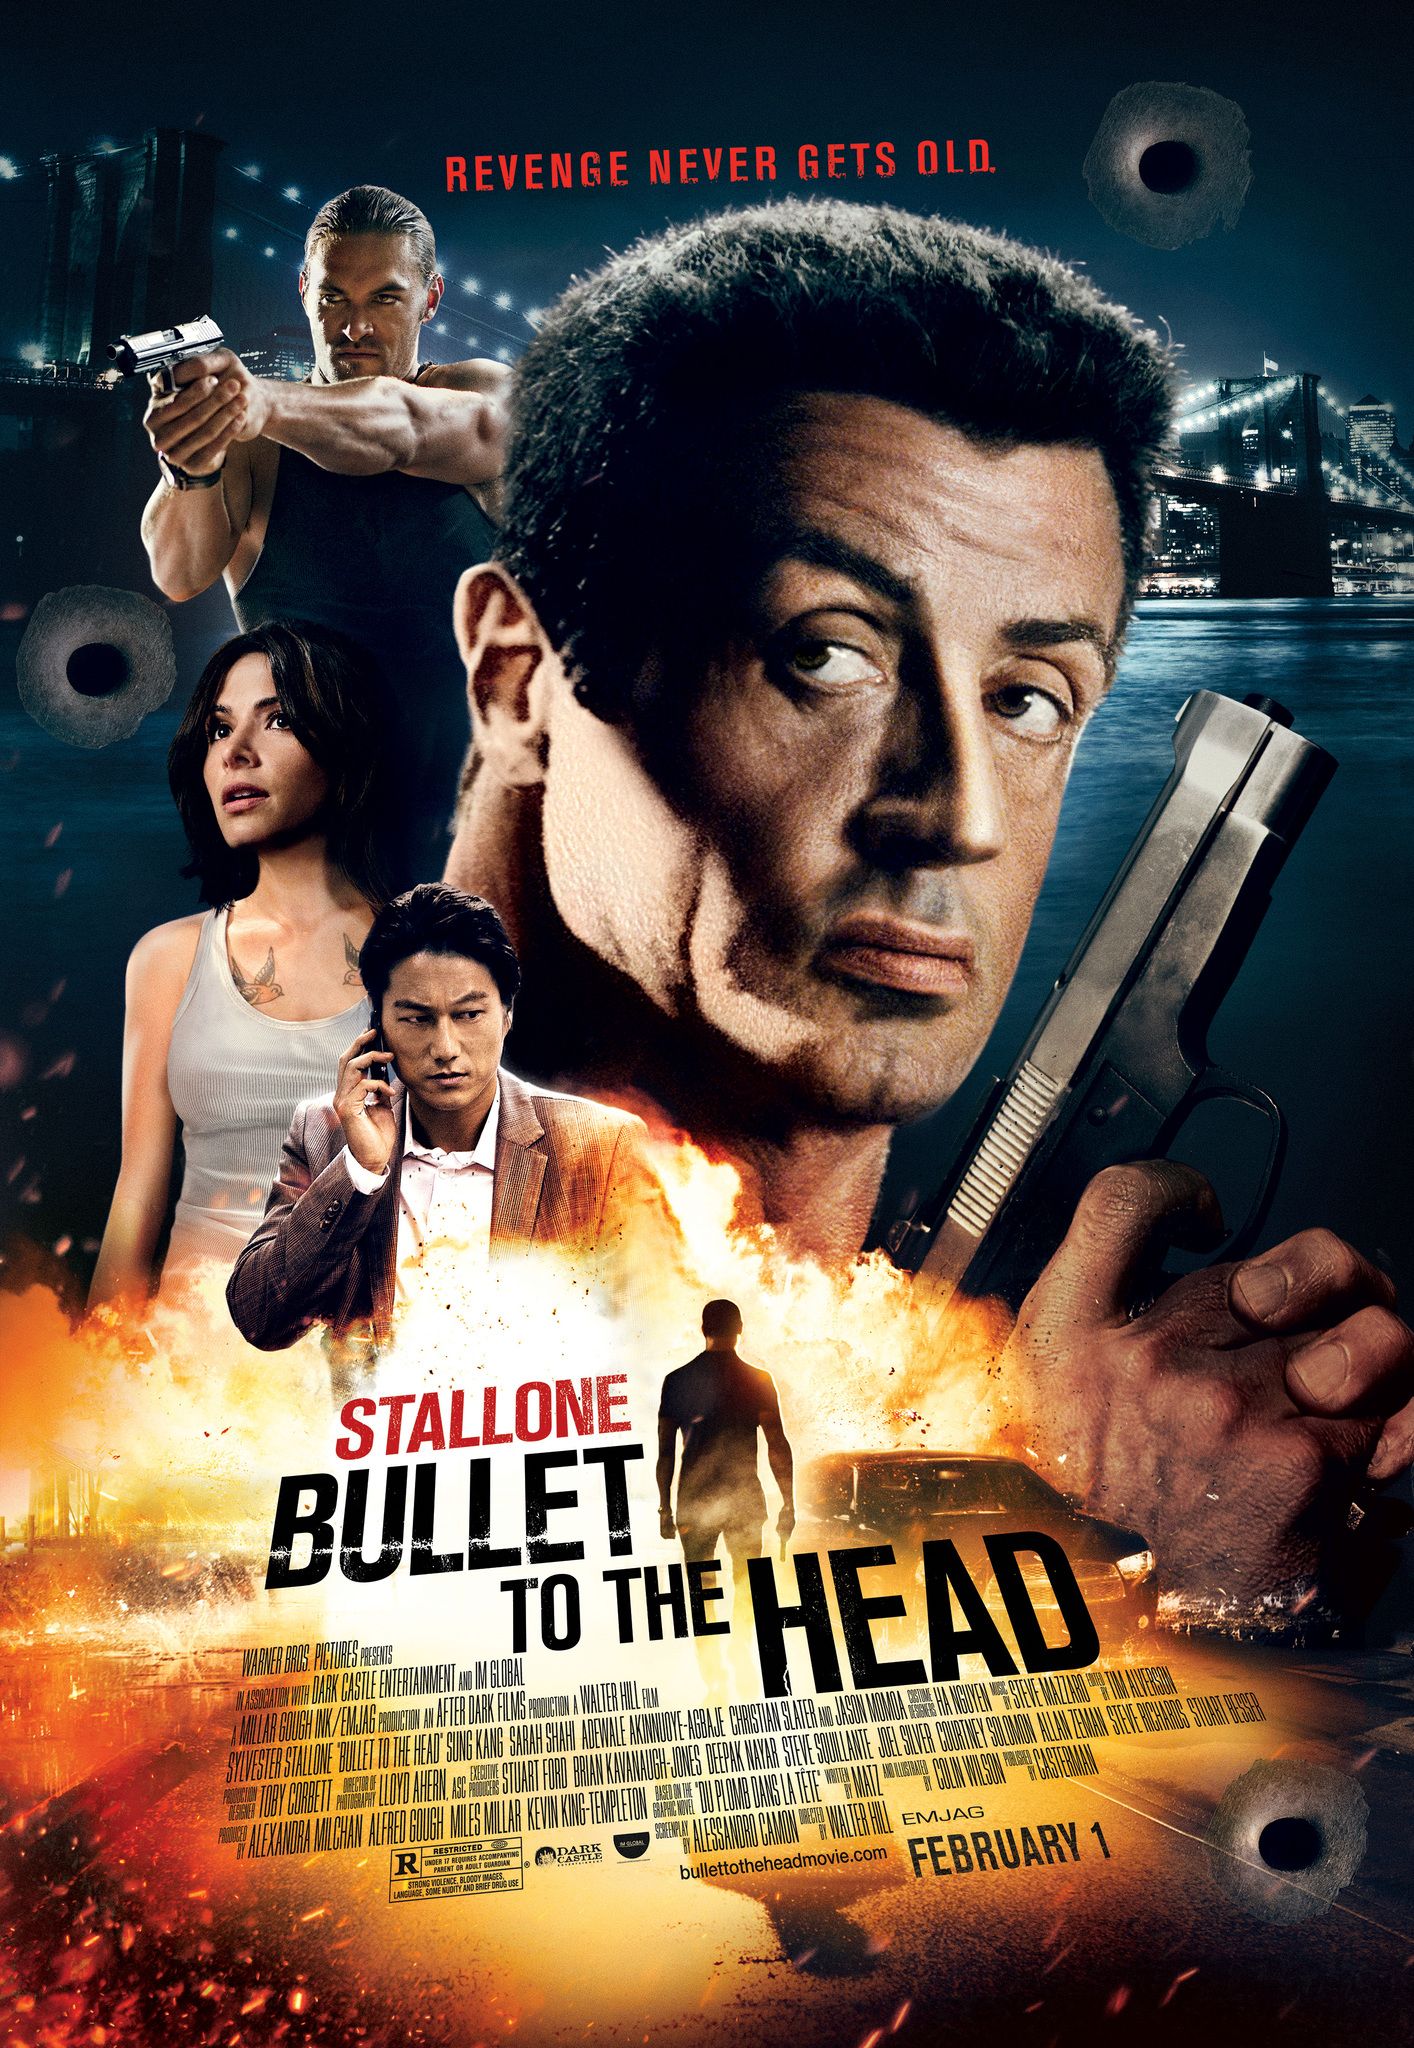 Bullet to the Head (2012) Hindi Dubbed Full Movie